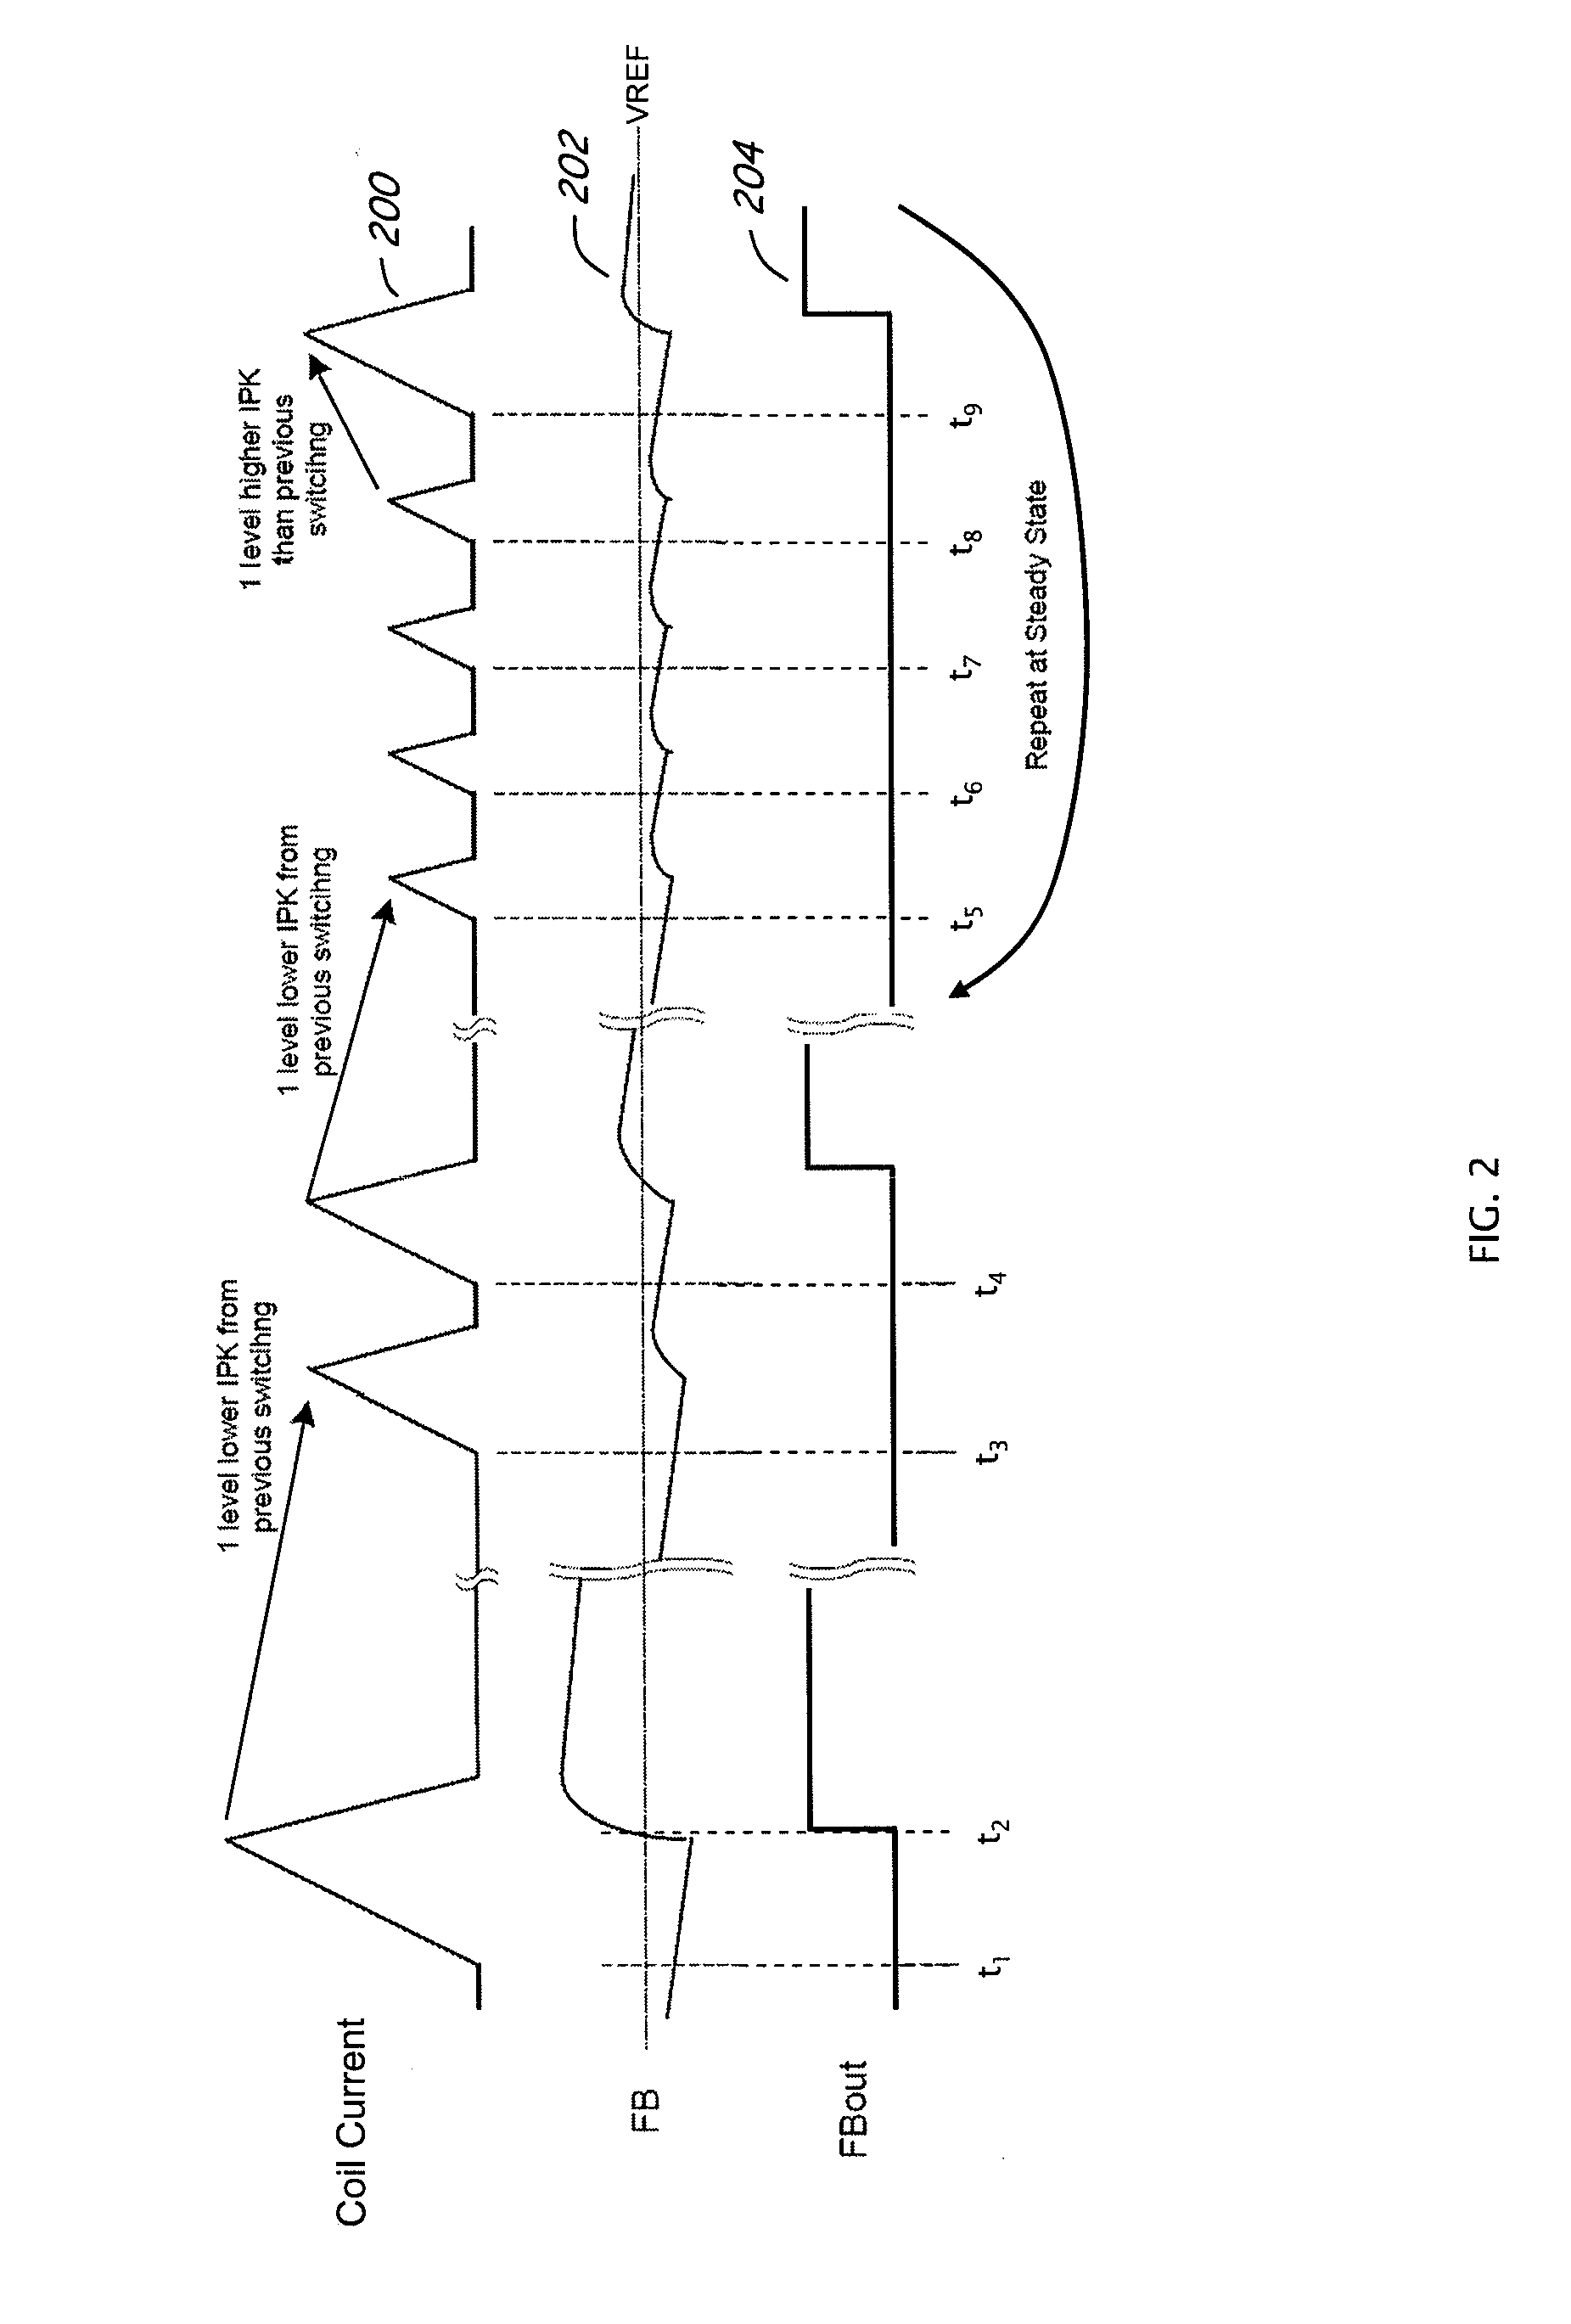 Boost converter with adaptive coil peak current